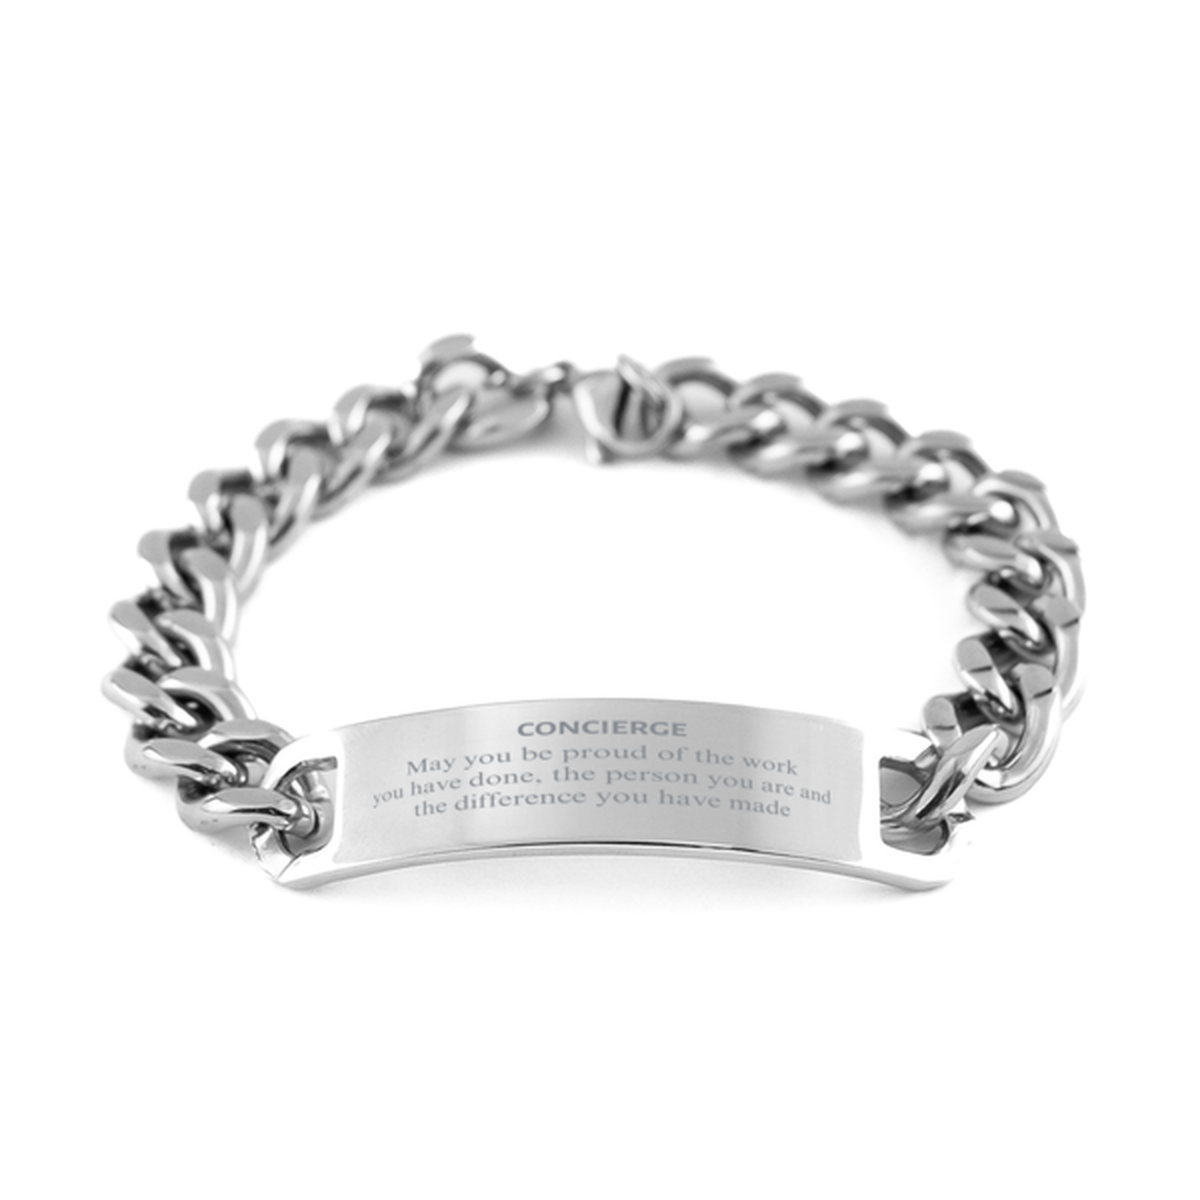 Concierge May you be proud of the work you have done, Retirement Concierge Cuban Chain Stainless Steel Bracelet for Colleague Appreciation Gifts Amazing for Concierge